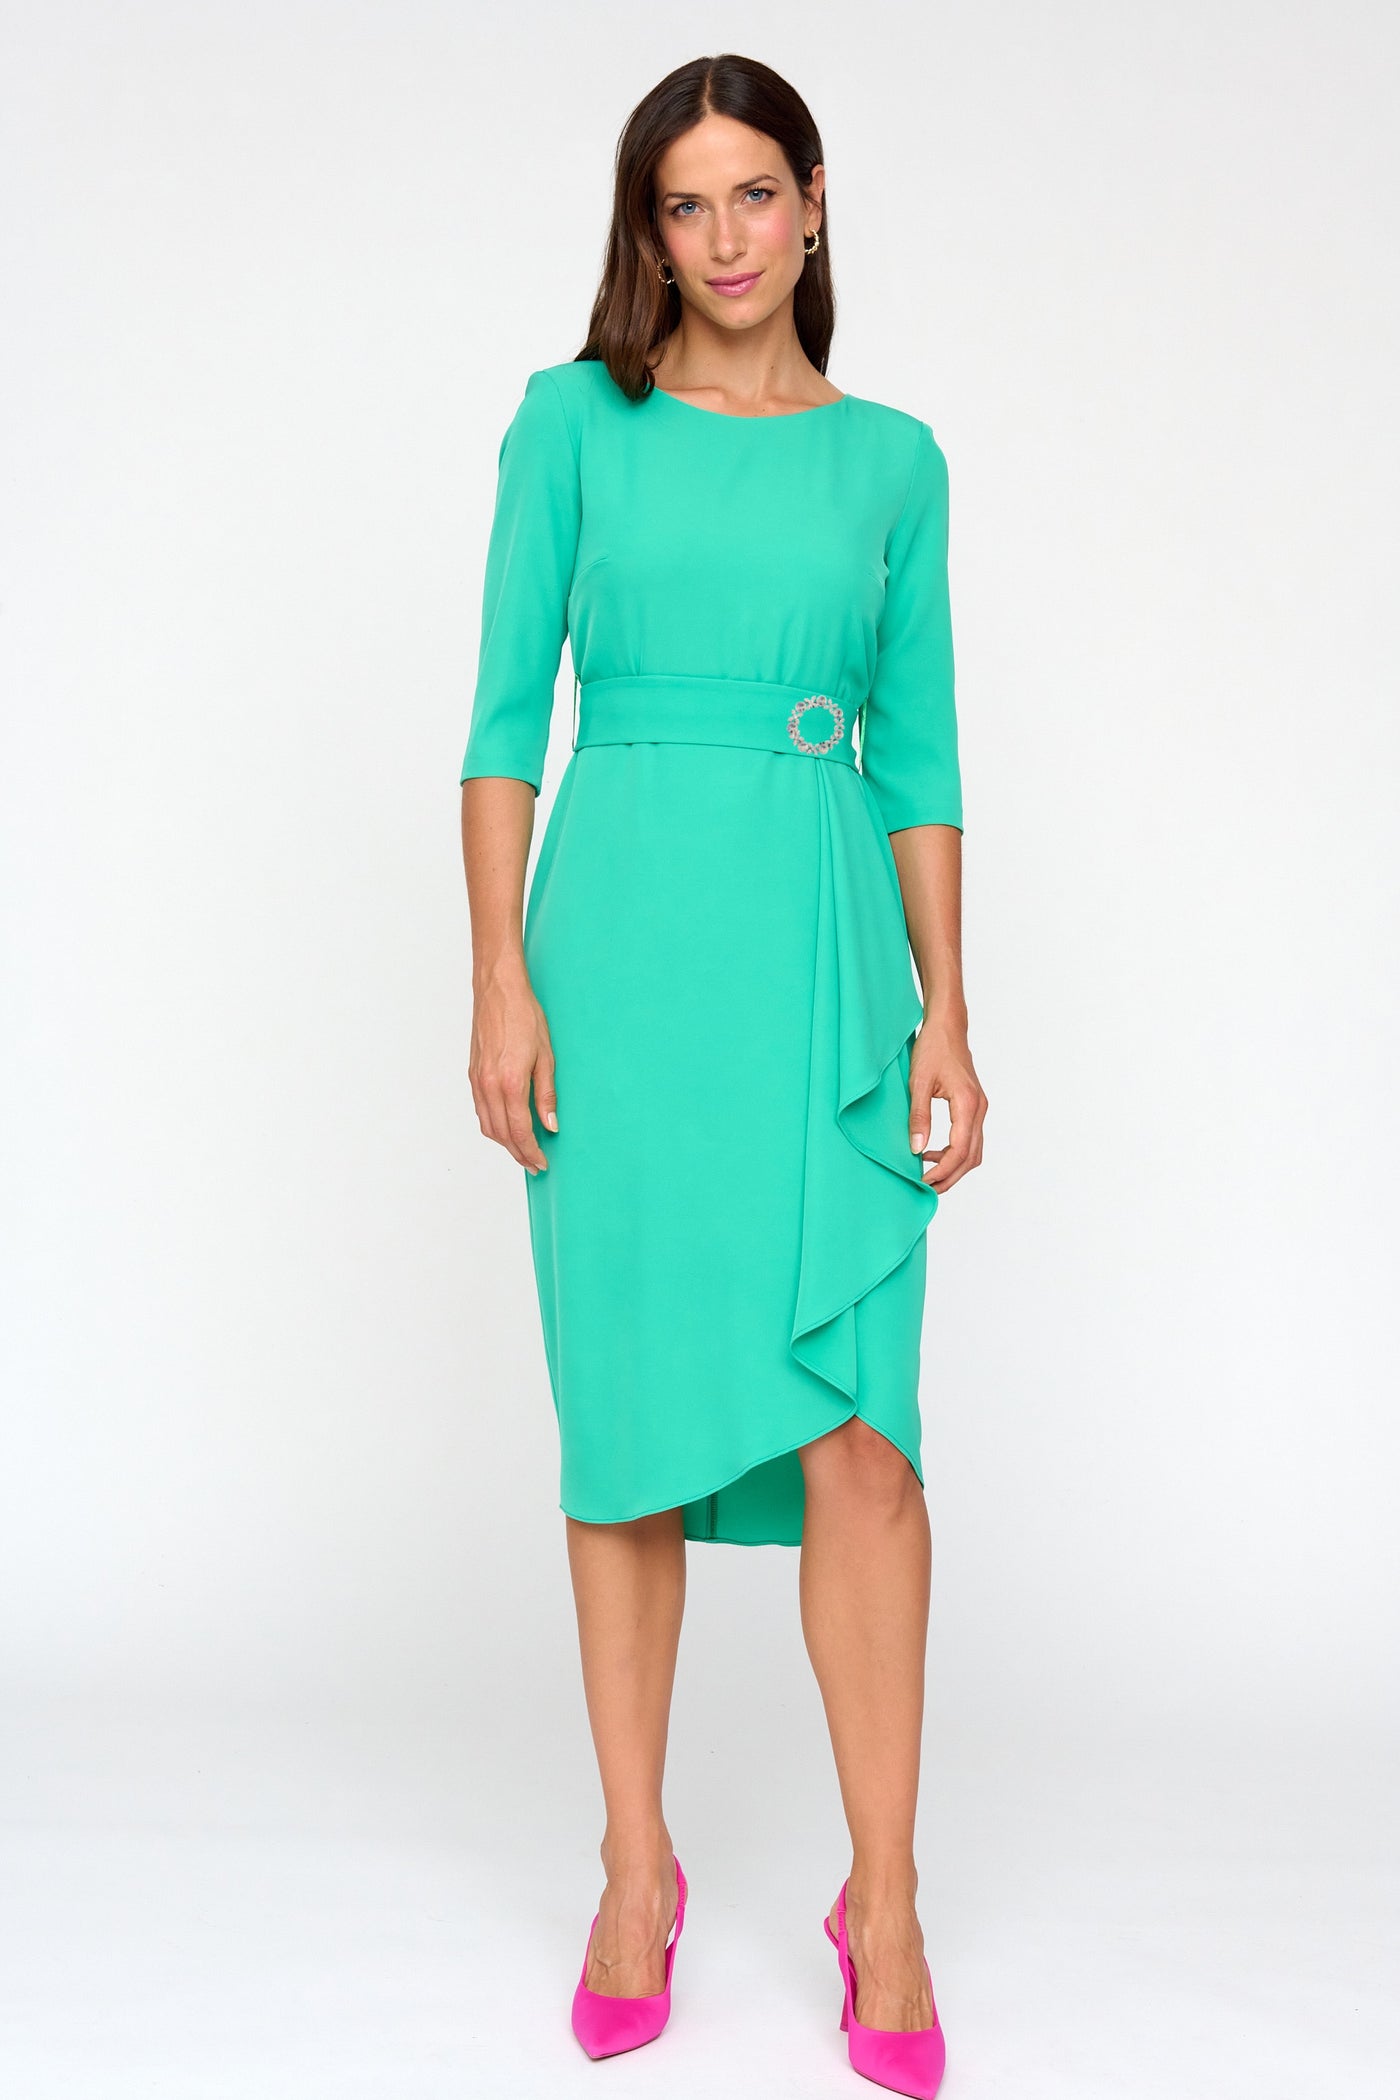 Green Dress with 3/4 Sleeve and Diamonte Broach